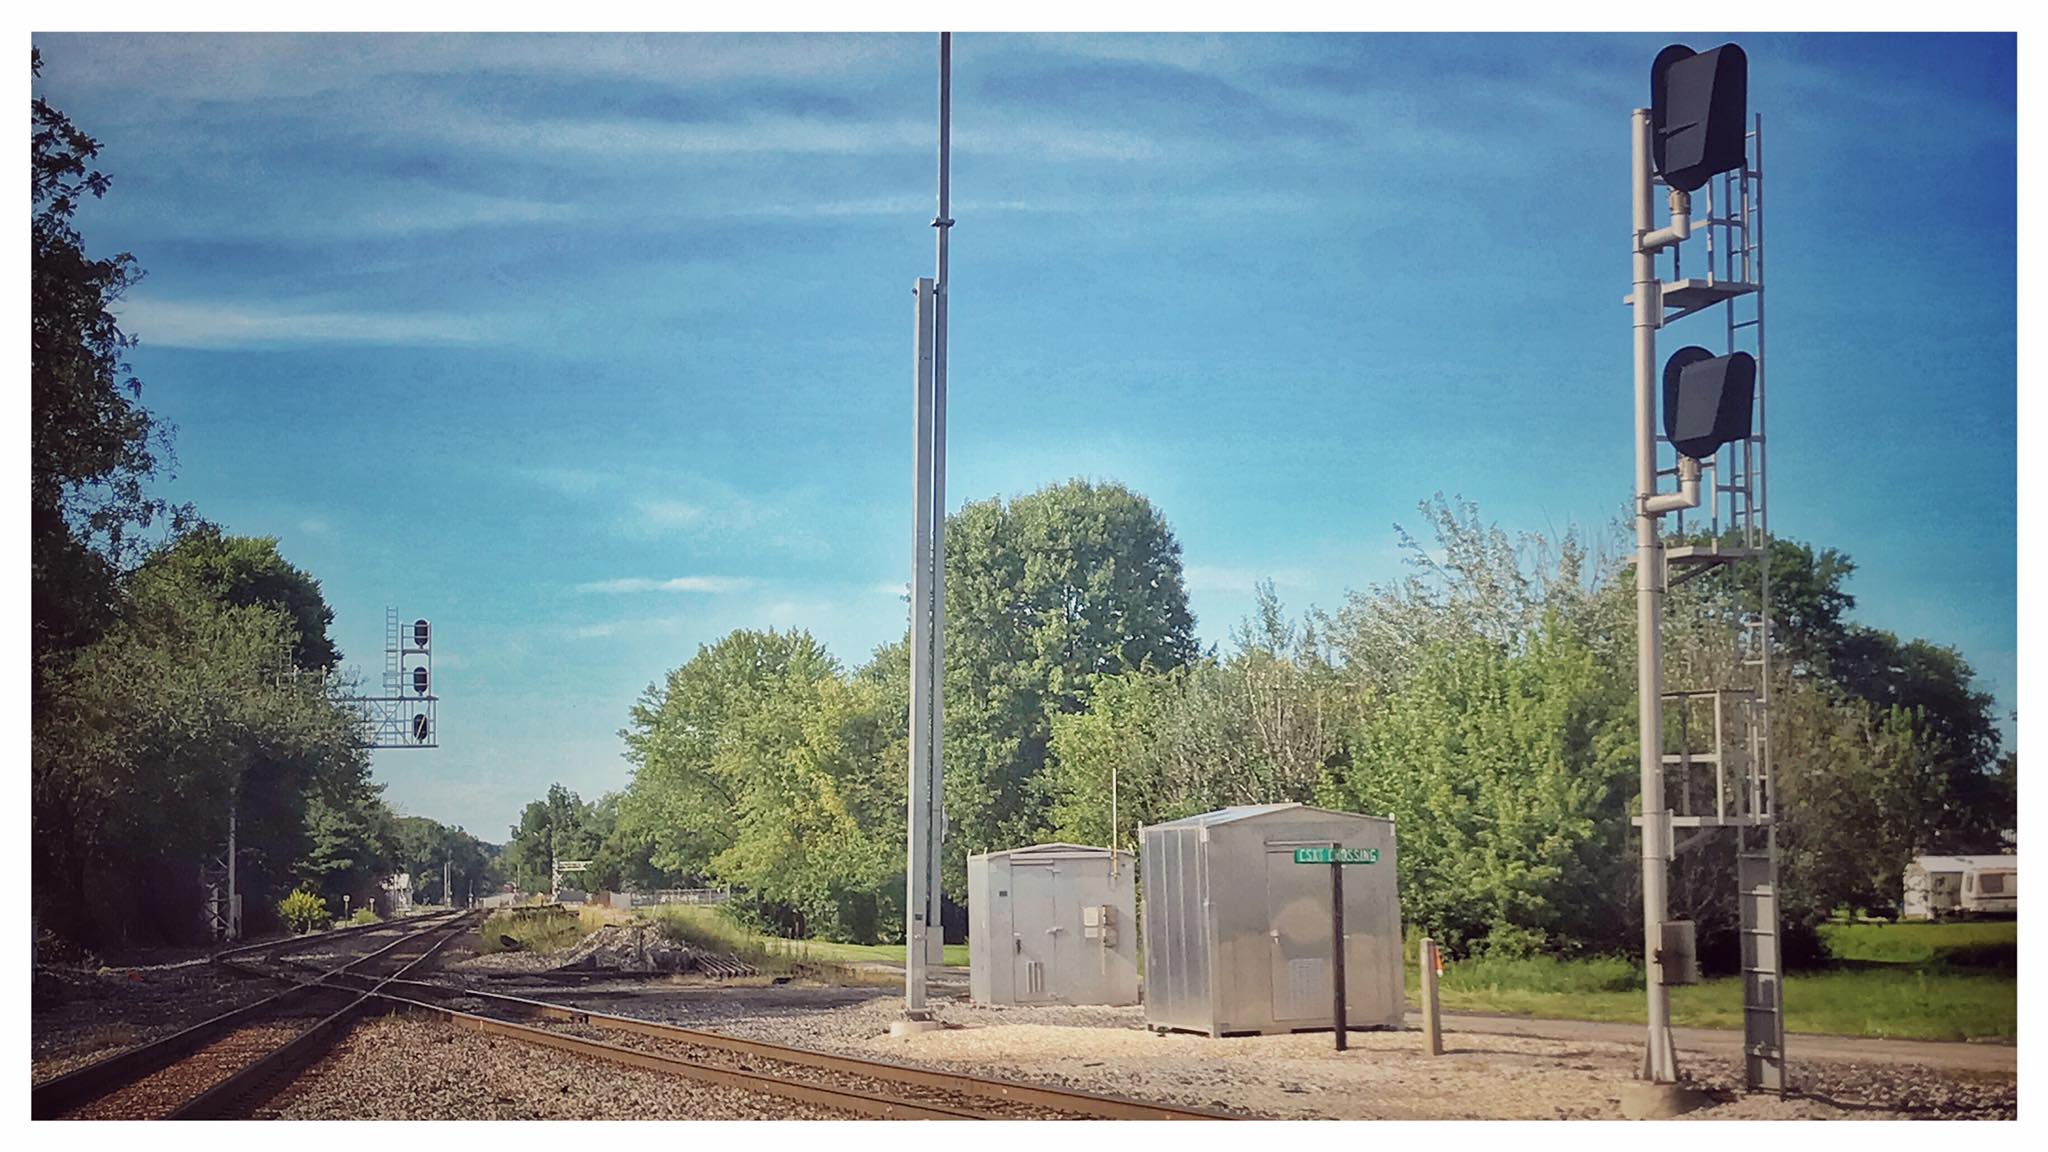 August 24, 2019 - Waiting for an eastbound NS freight at the Southern Crossover in Princeton, Indiana.